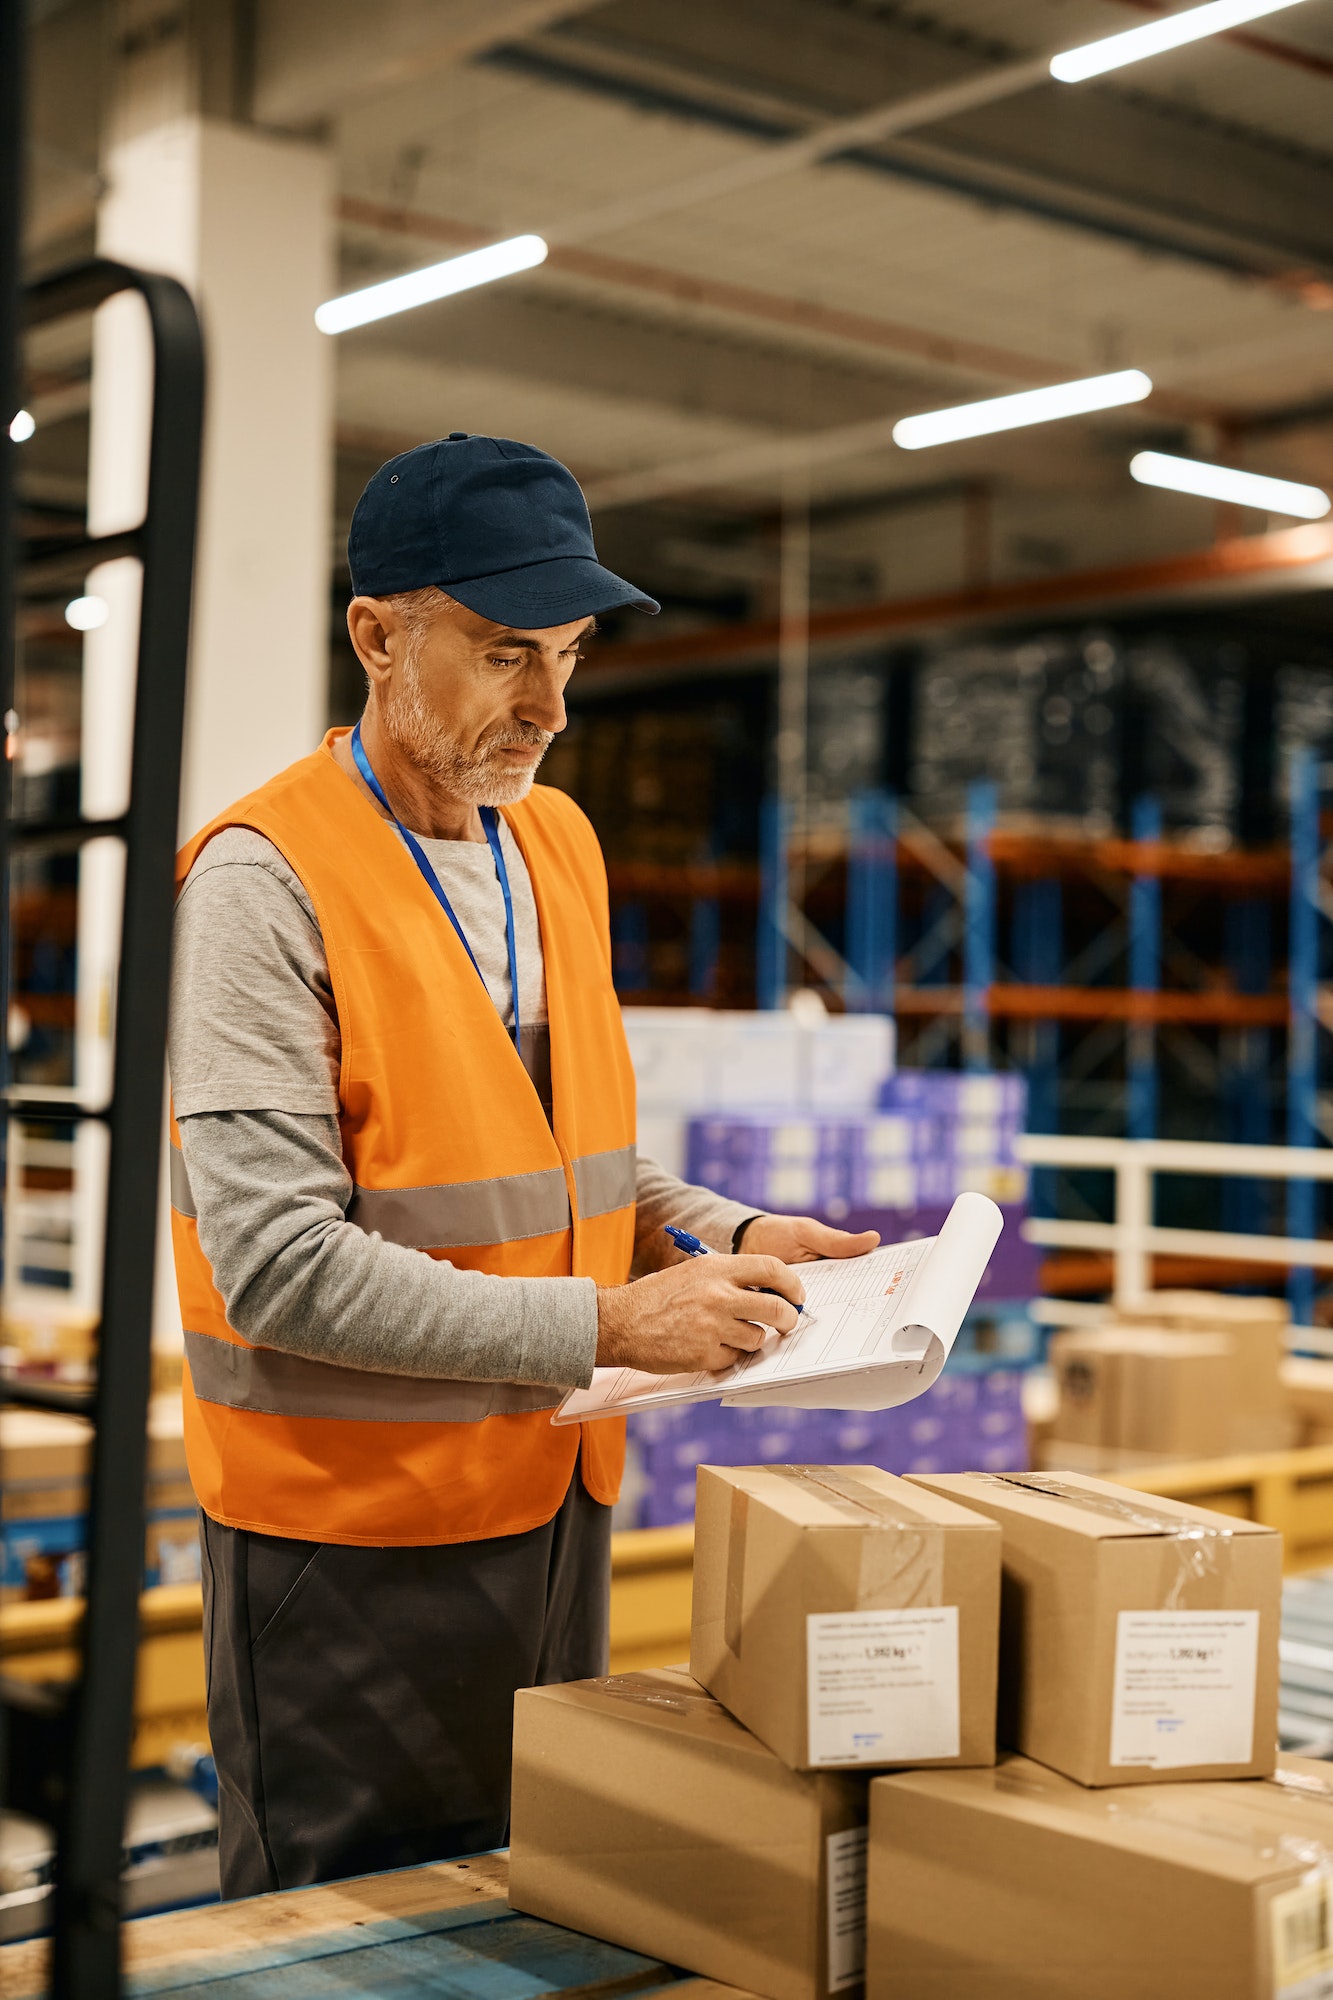 mature-worker-goes-through-checklist-while-preparing-packages-for-further-distribution-in-warehouse-